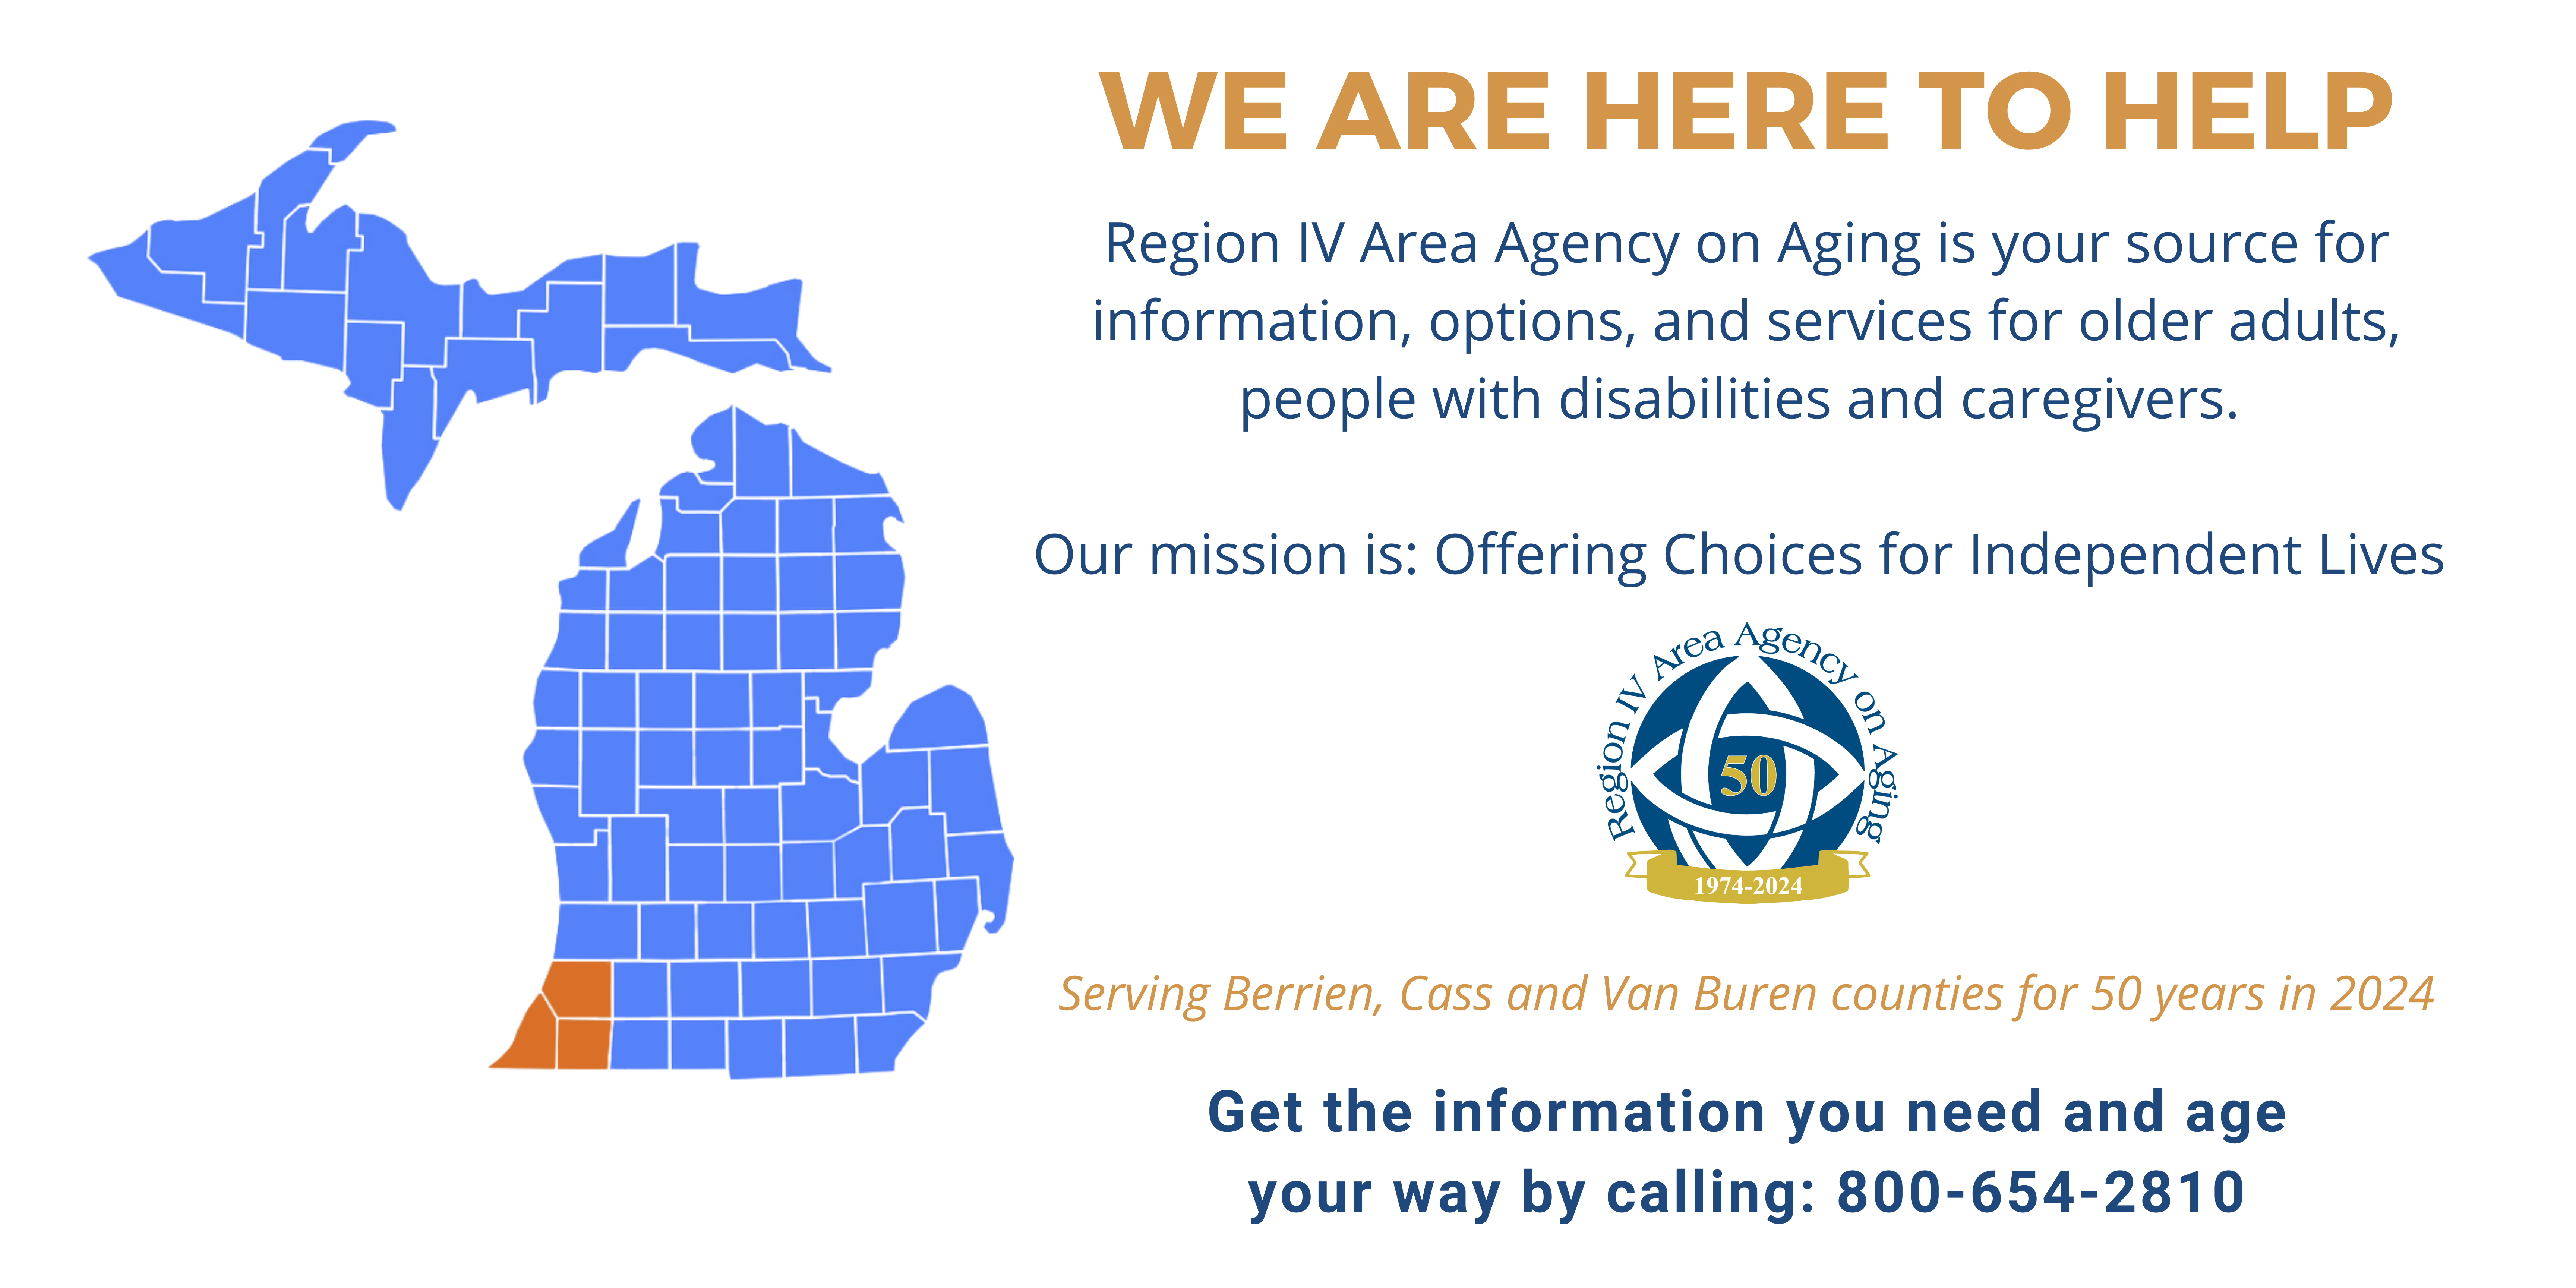 Picture of Michigan with Berrien, Cass and Van Buren counties highlighted. Text says: We are here to help. Region IV Area Agency on Aging is your source for information, options, and services for older adults, people with disabilities and caregivers. Our mission is Offering Choices for Independent Lives. Serving, Berrien, Cass and Van Buren counites for 50 years in 2024. Get the information you need and age your way by calling: 800-654-2810.